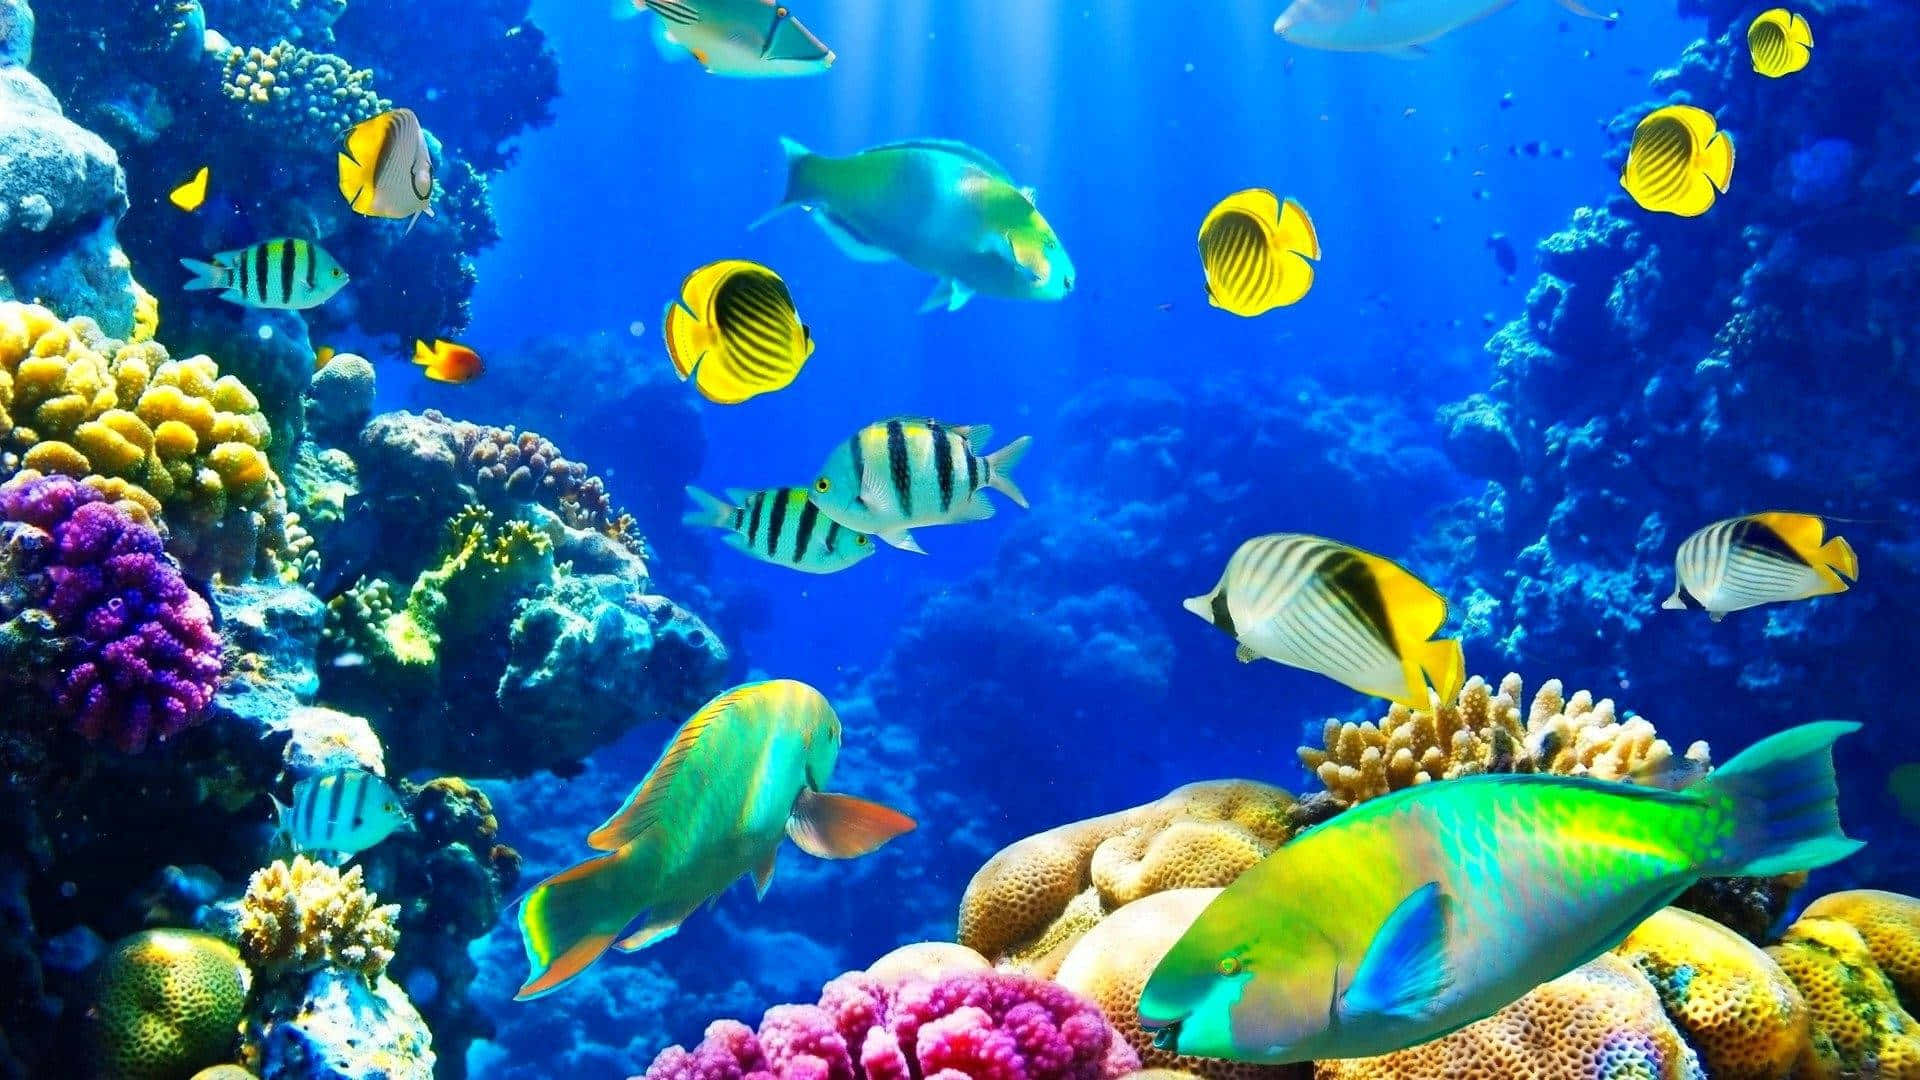 Download Underwater Ocean With Fishes Background | Wallpapers.com